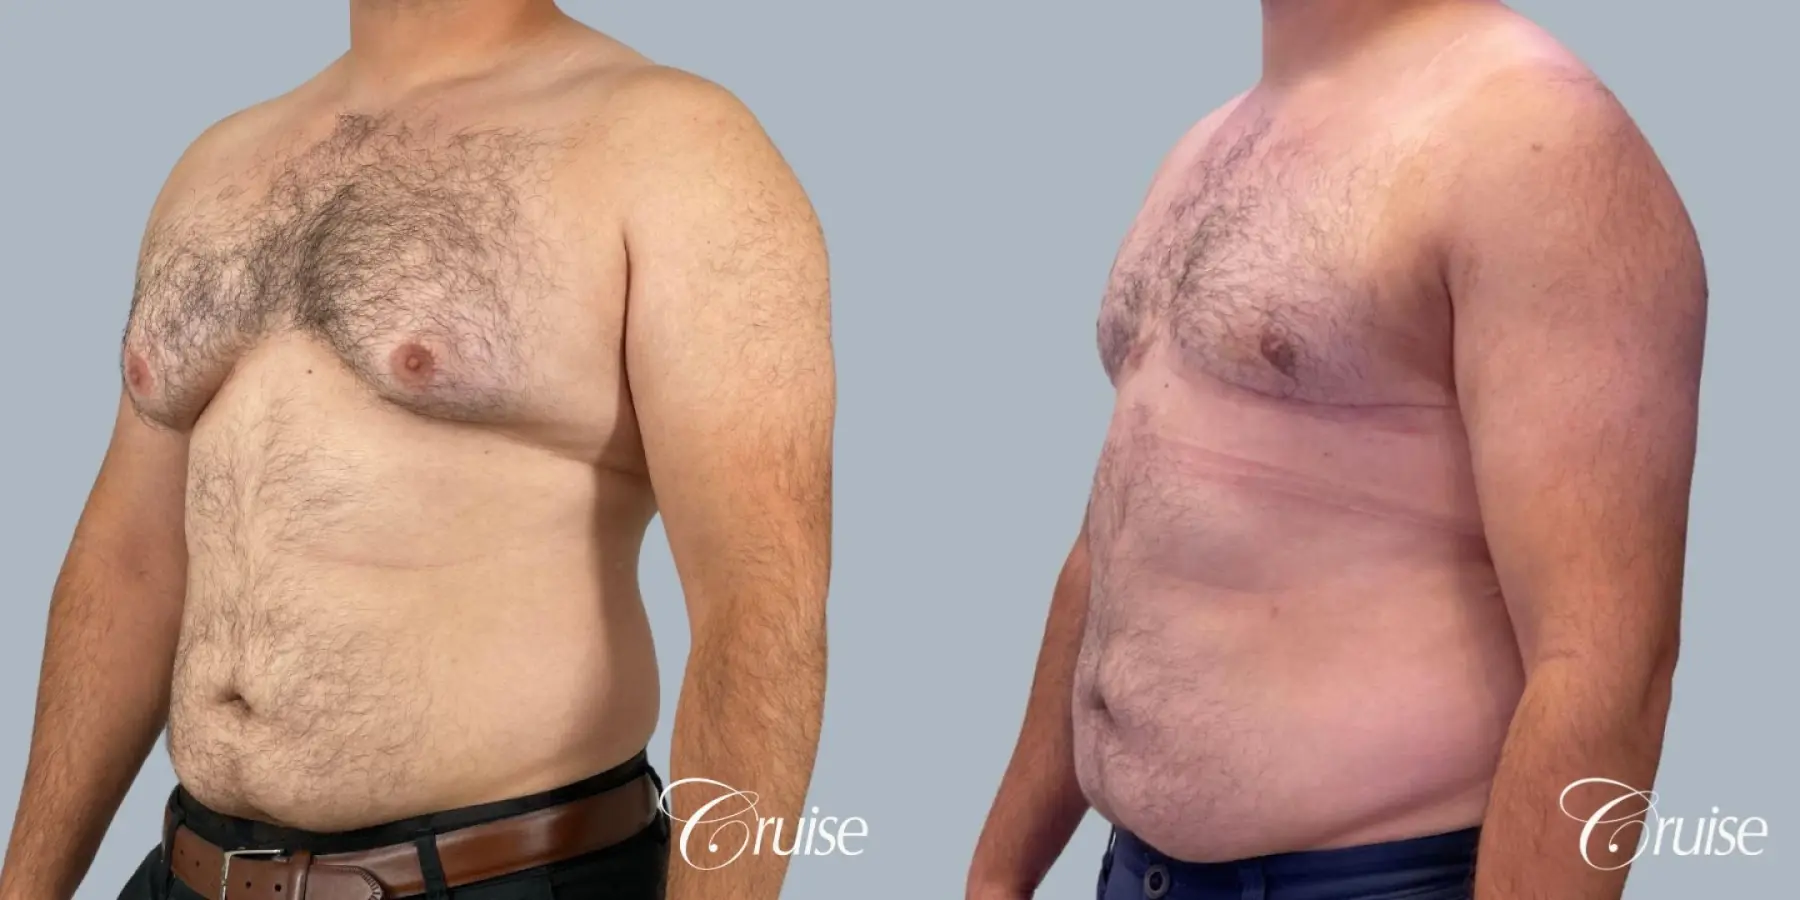 Gynecomastia: Patient 9 - Before and After 3